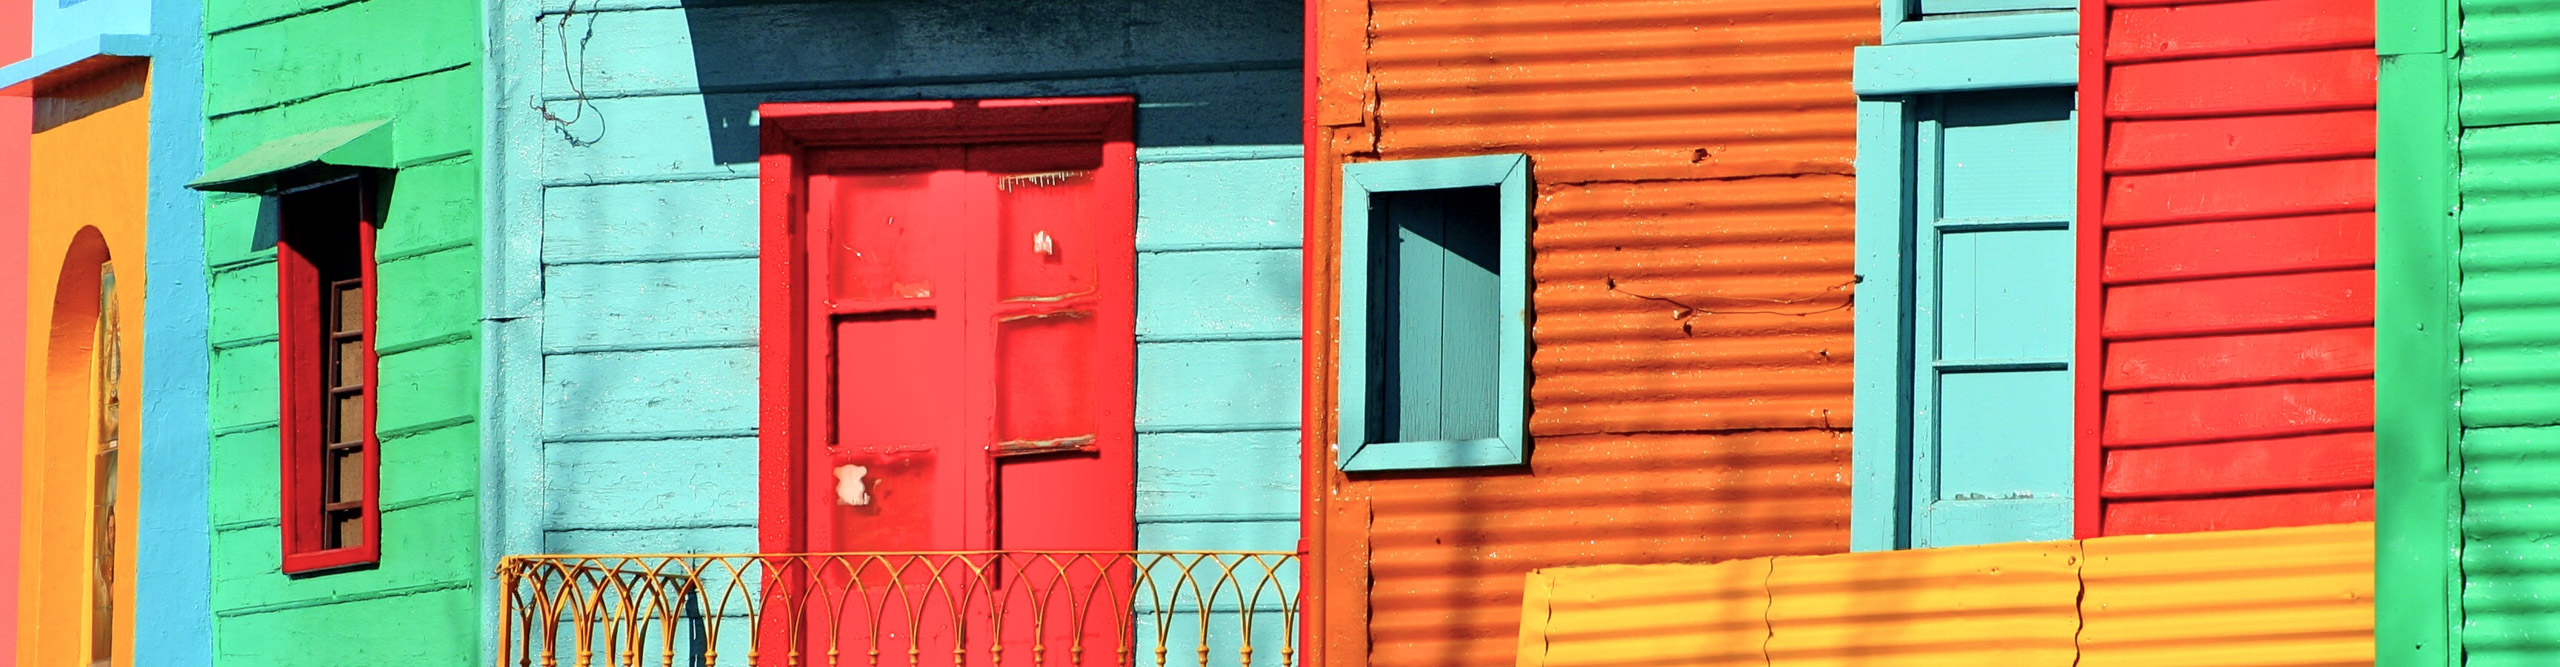 The colourful buildings of the suburb of La Boca in Buenos Aires, Argentina